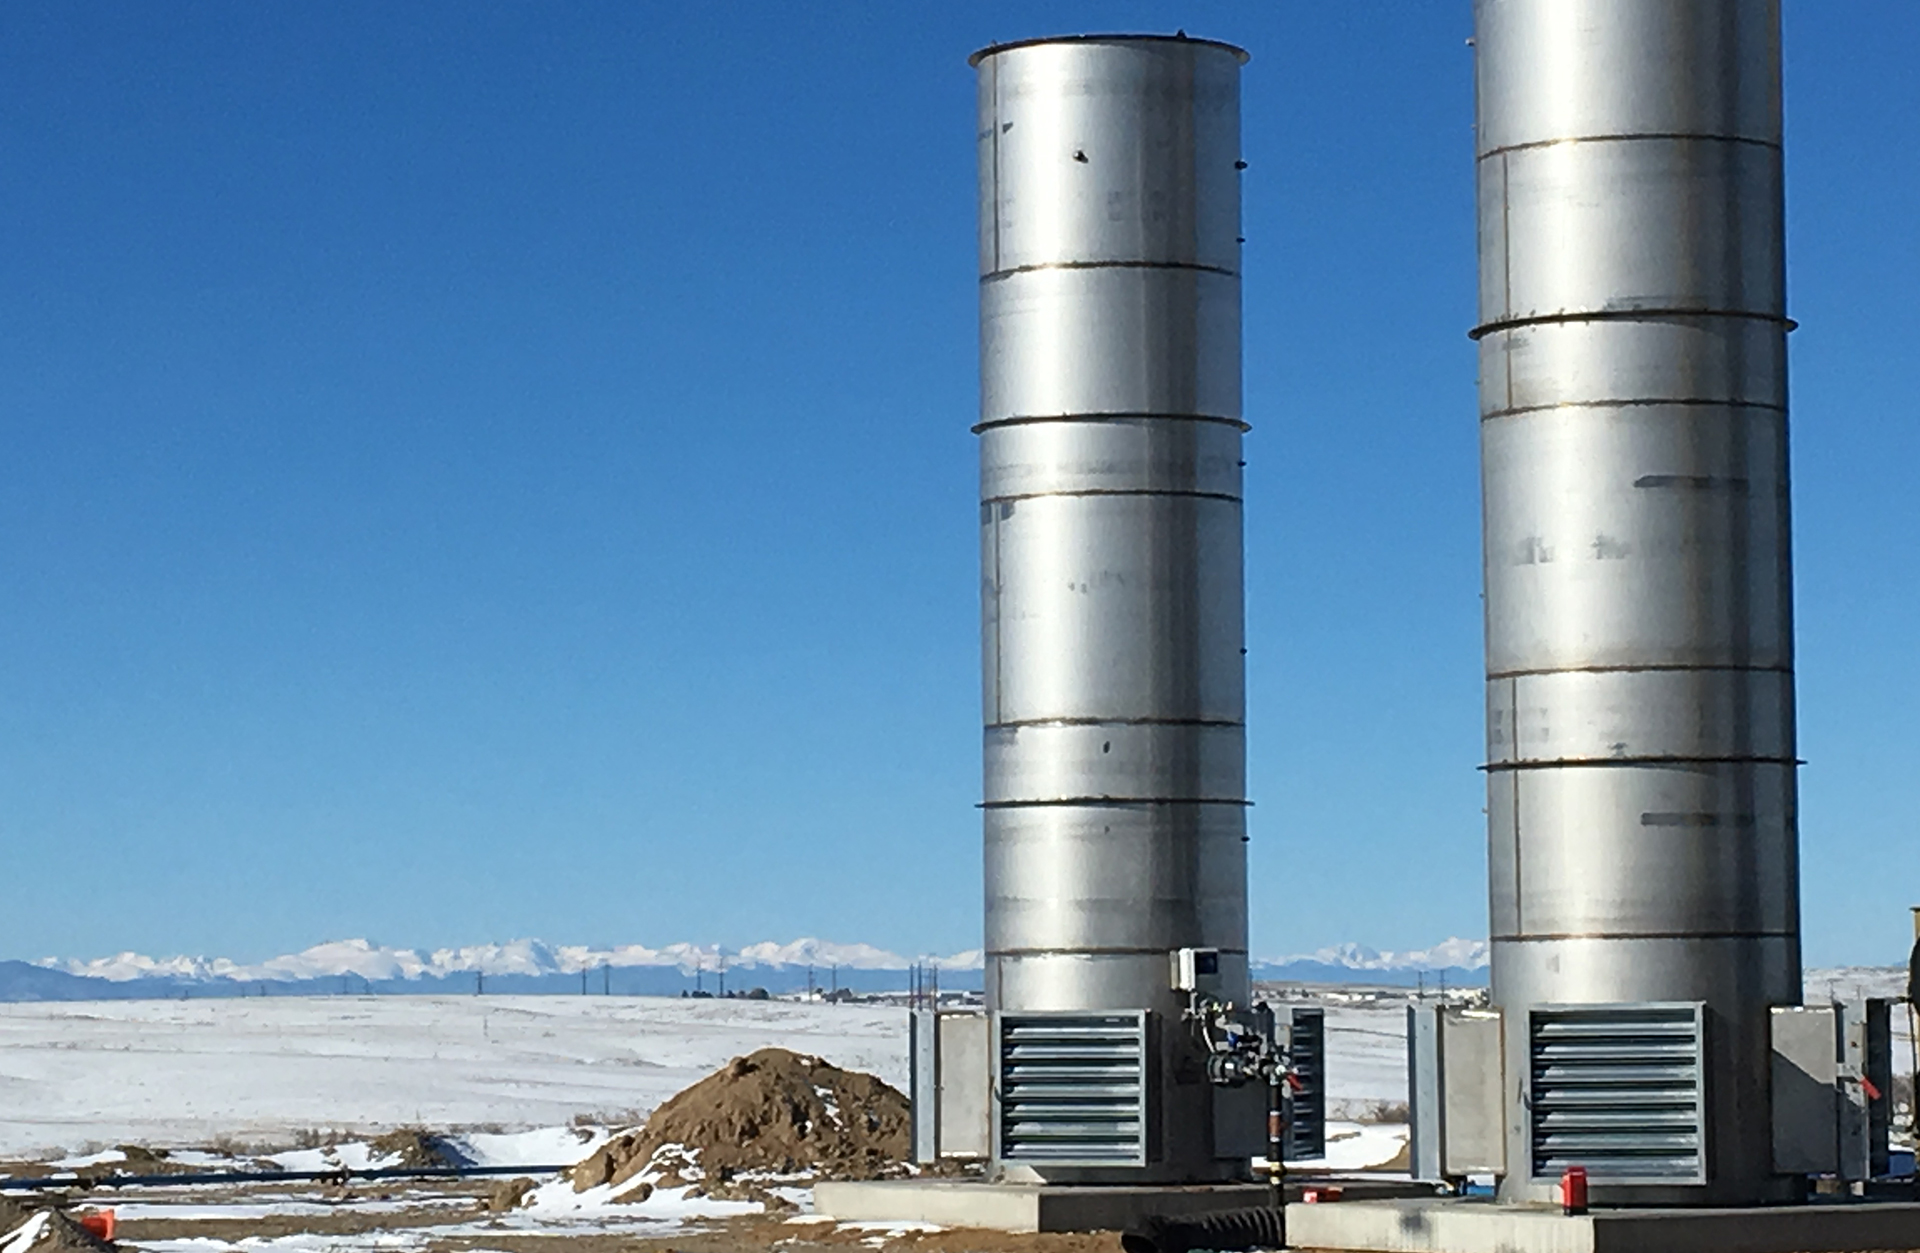 Enclosed Combustor in snow on oilfield production site